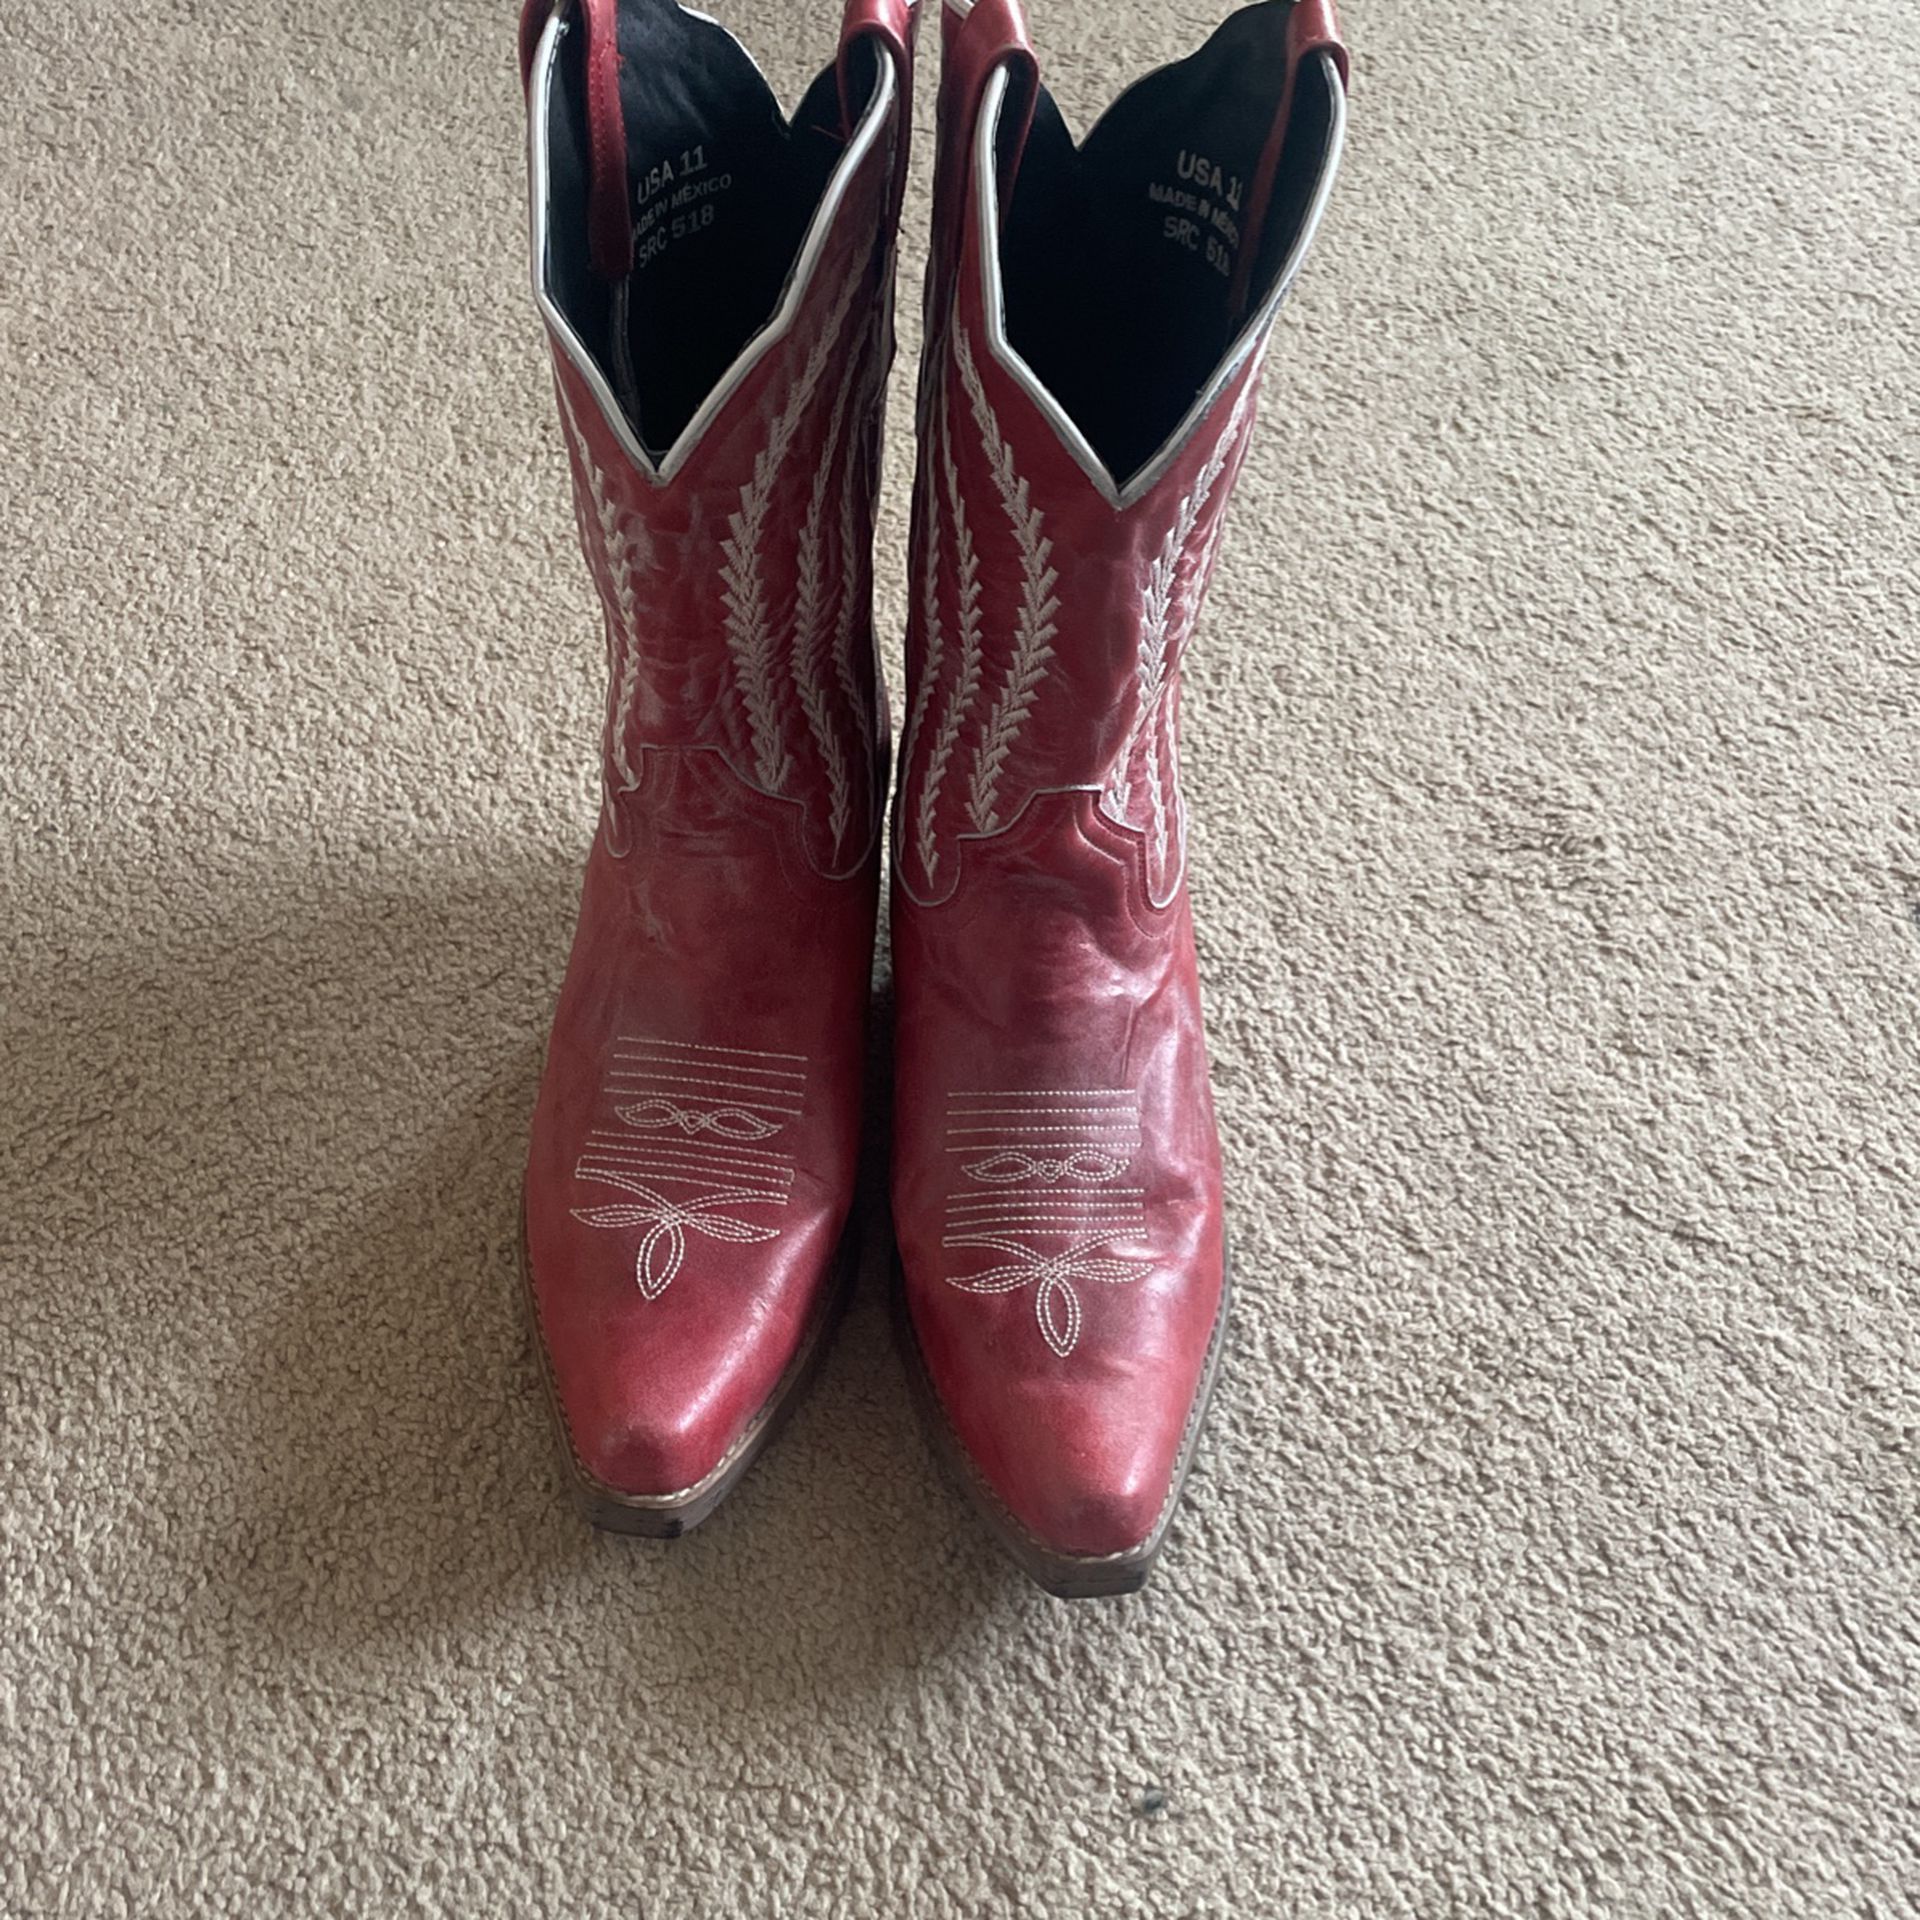 Red Women’s Cowboy Boots 